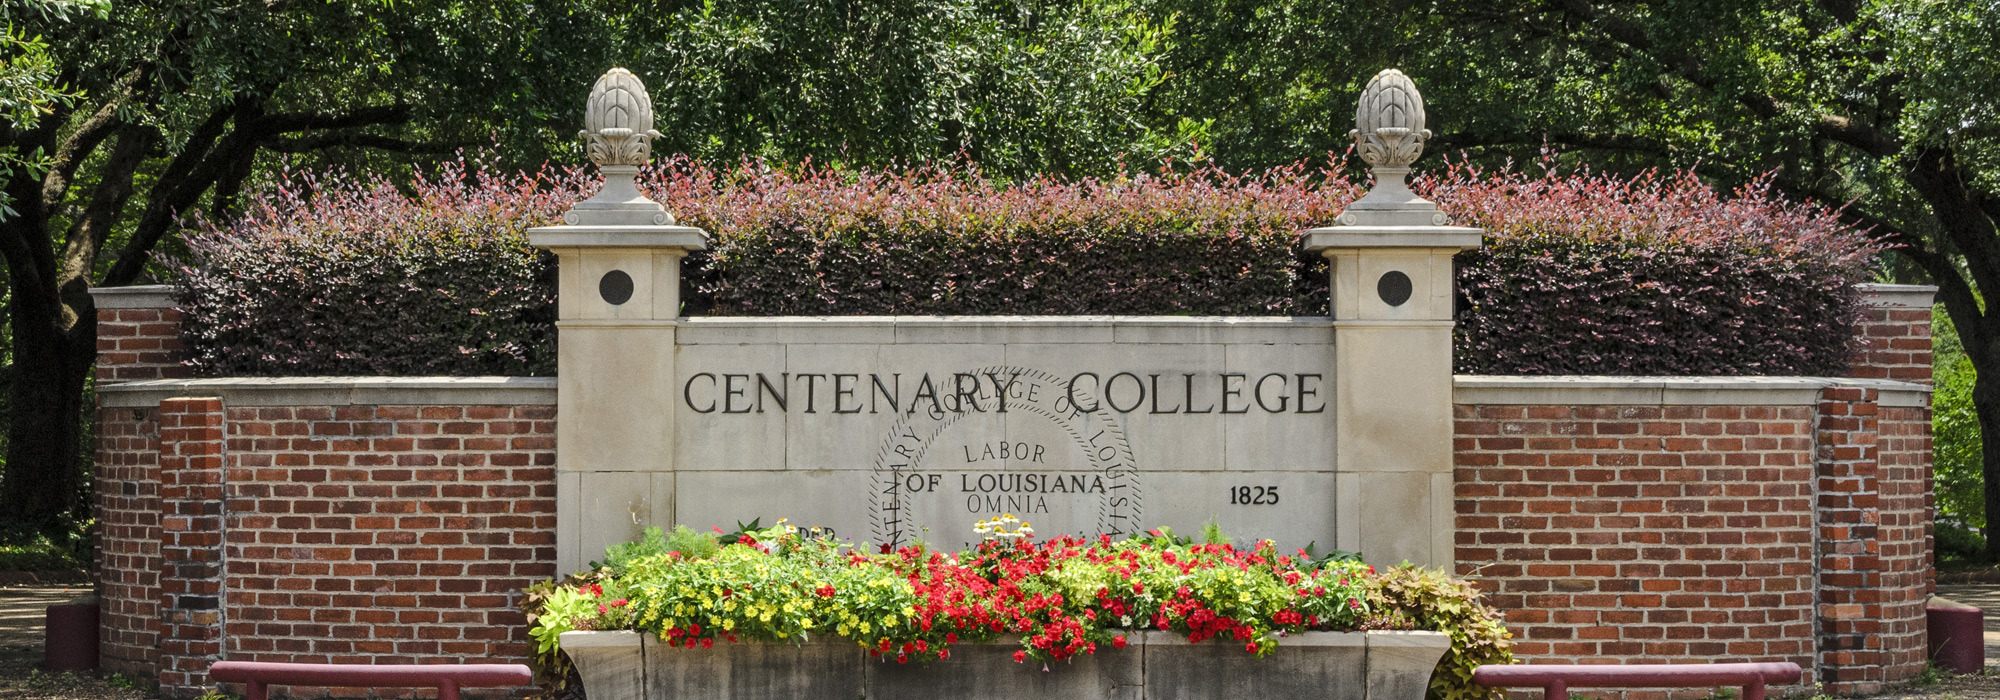 Centenary College welcome